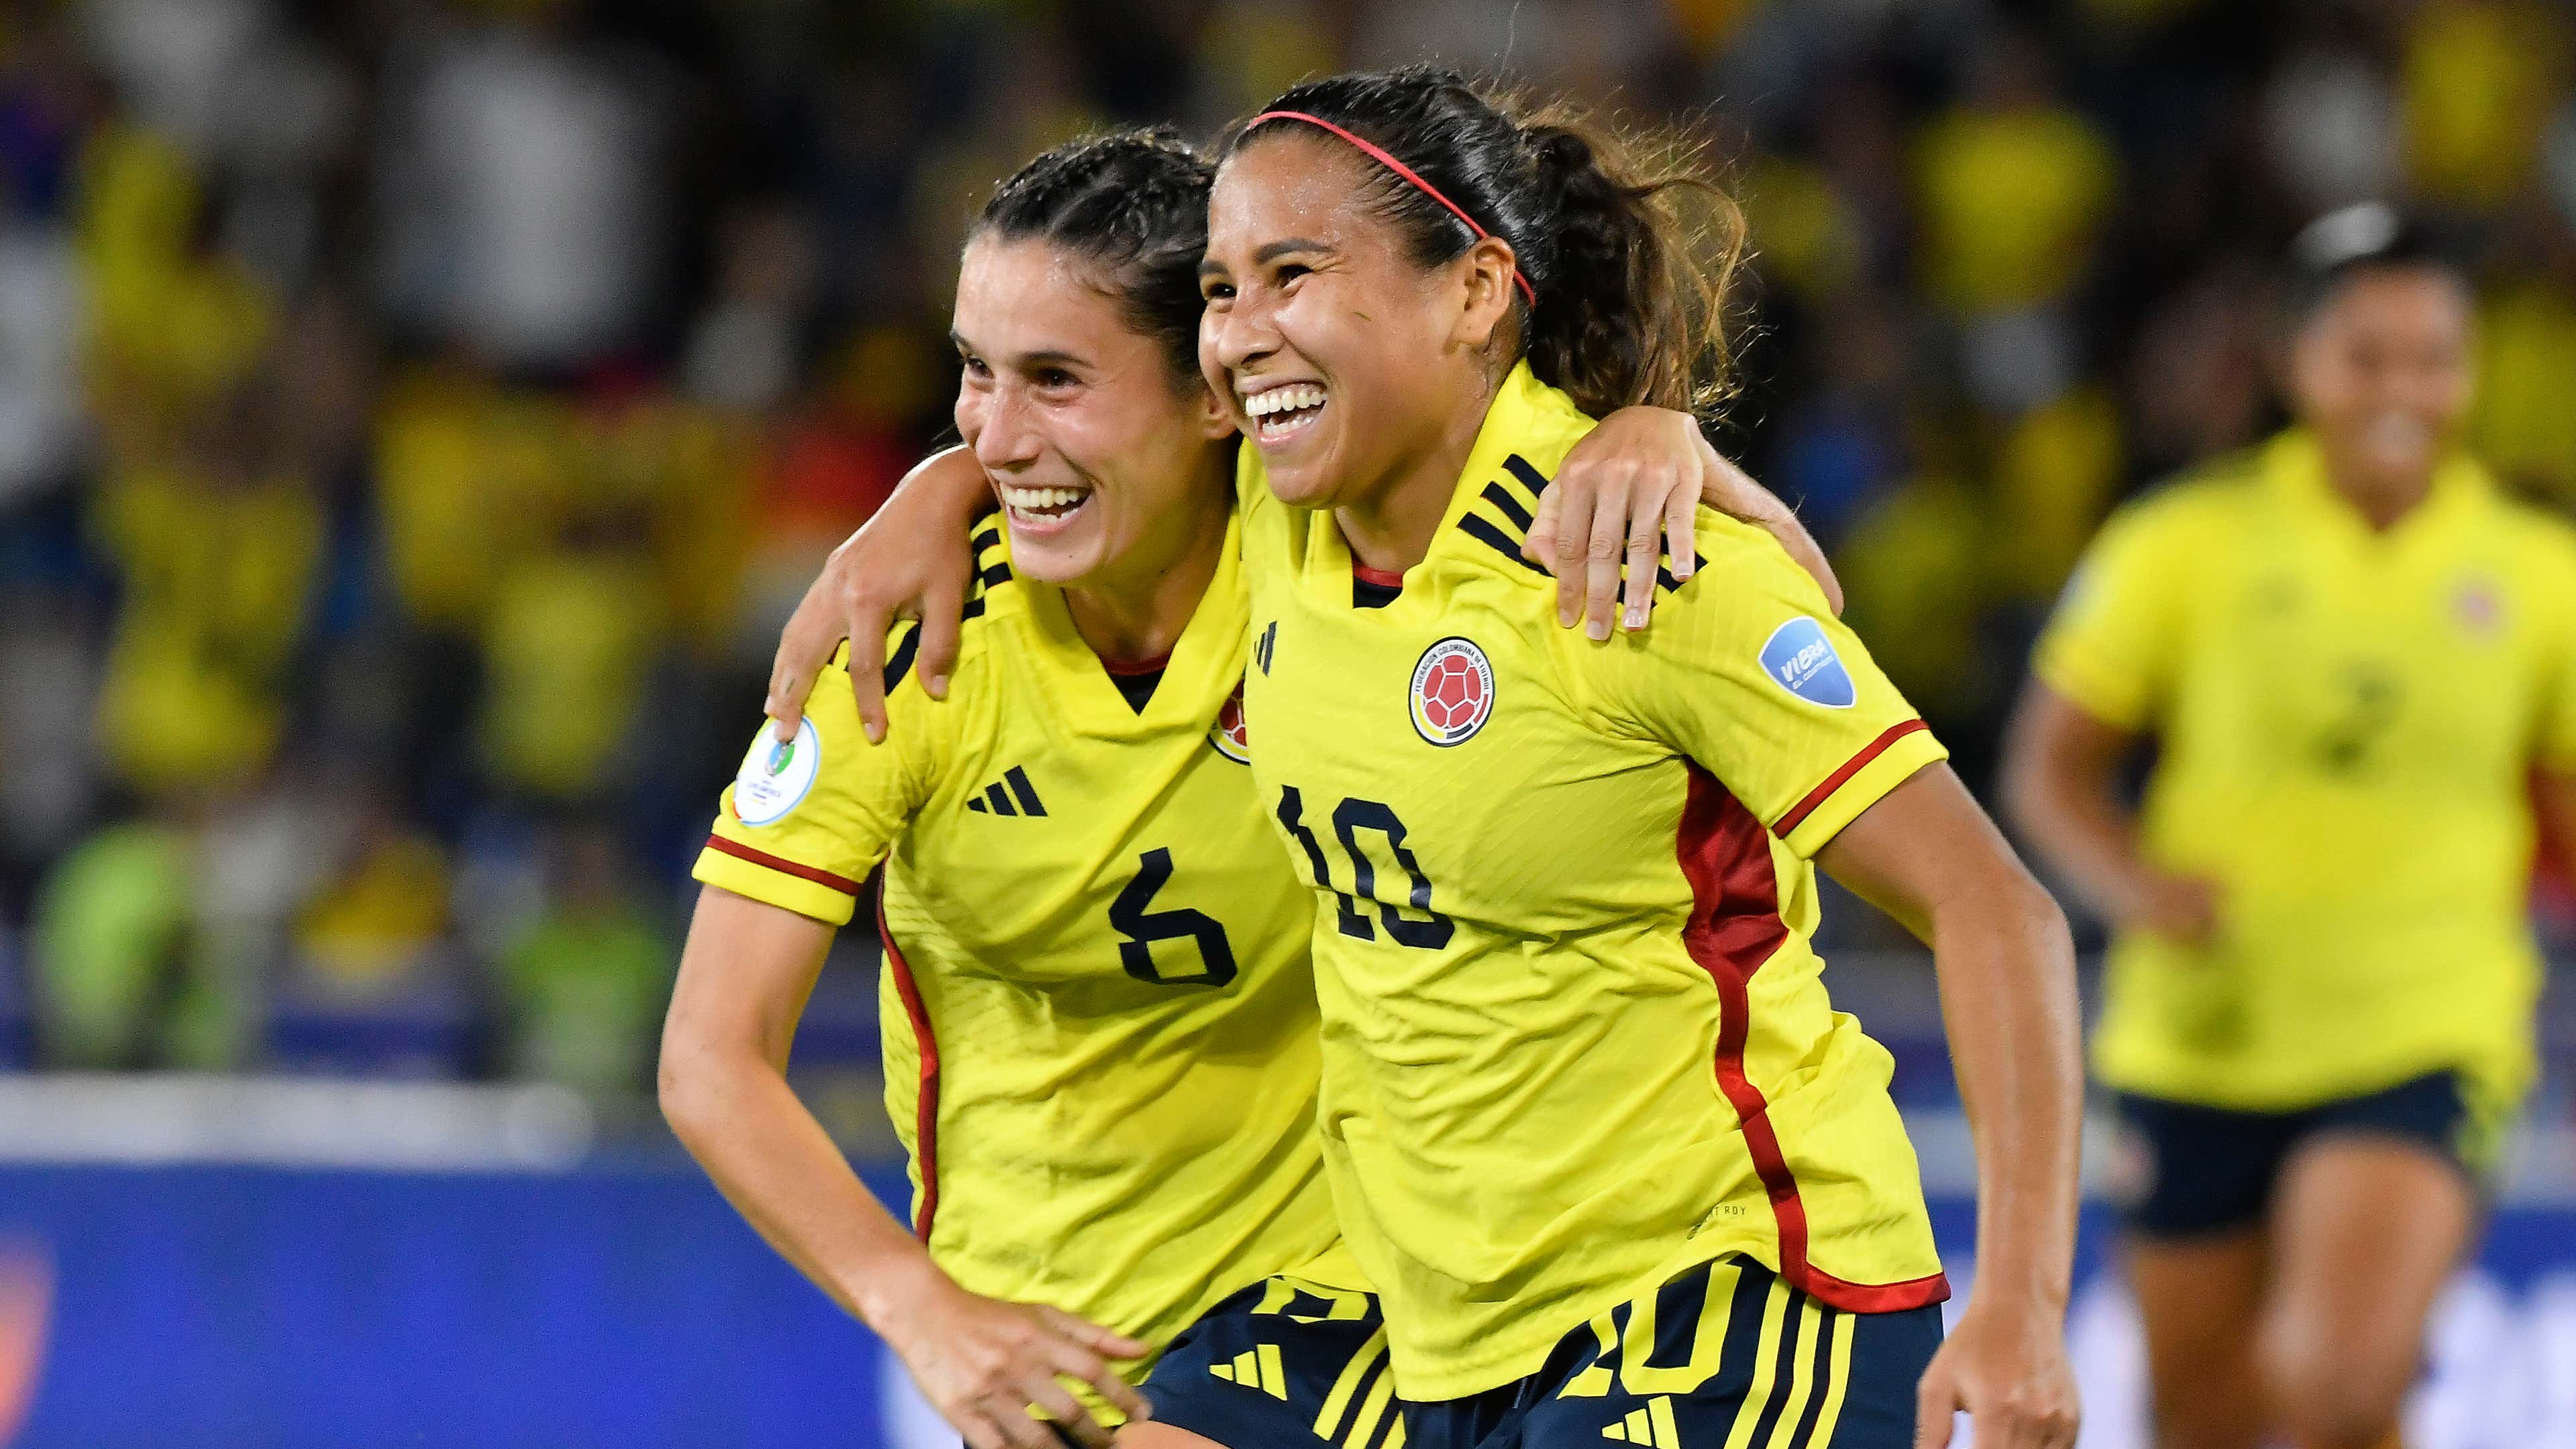 Colombia Women's World Cup 2023 squad: The 23-woman squad for the